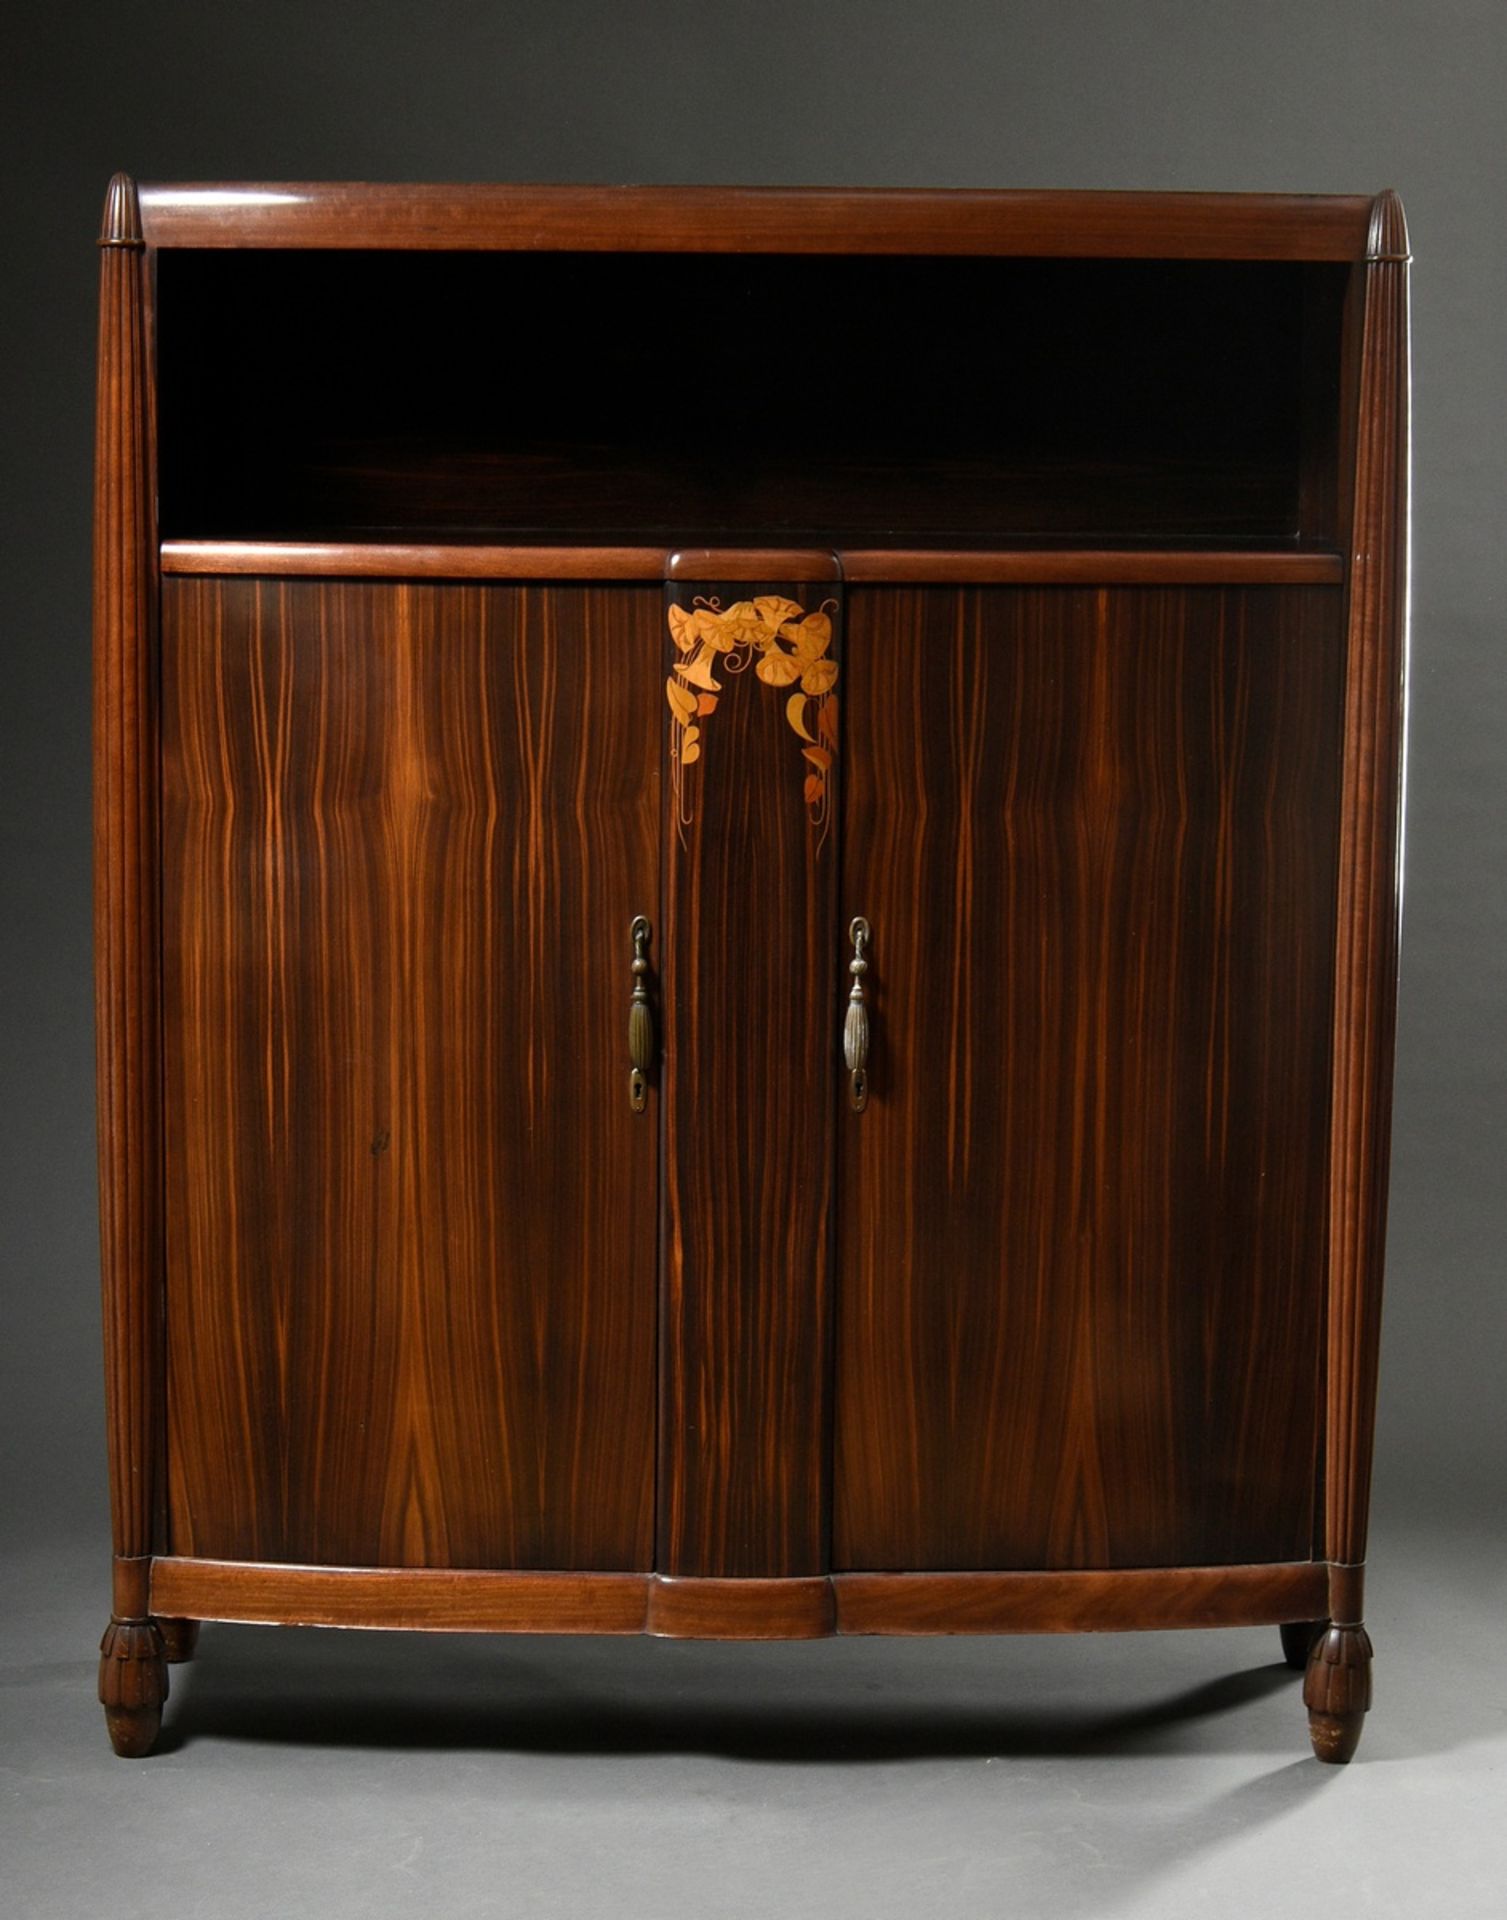 Art Deco cabinet in the style of Emile-Jacques Ruhlmann (1879-1933) with sparse inlay "winches" and - Image 2 of 6